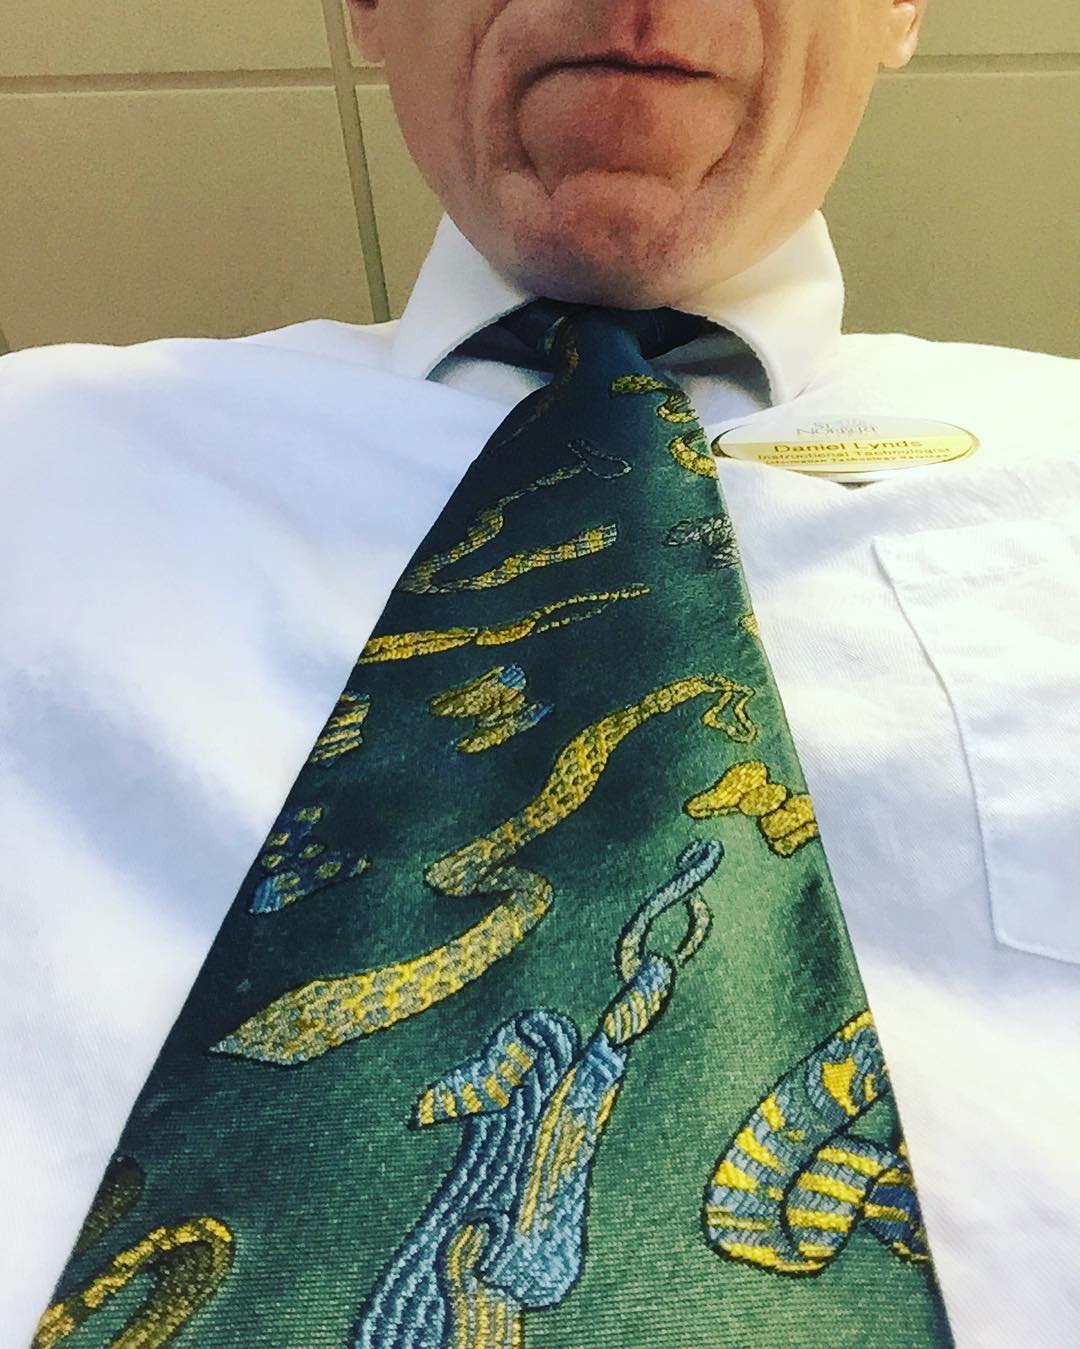 My “real” #tiedayfriday for #aprilfools – the meta tie. tie with ties on it